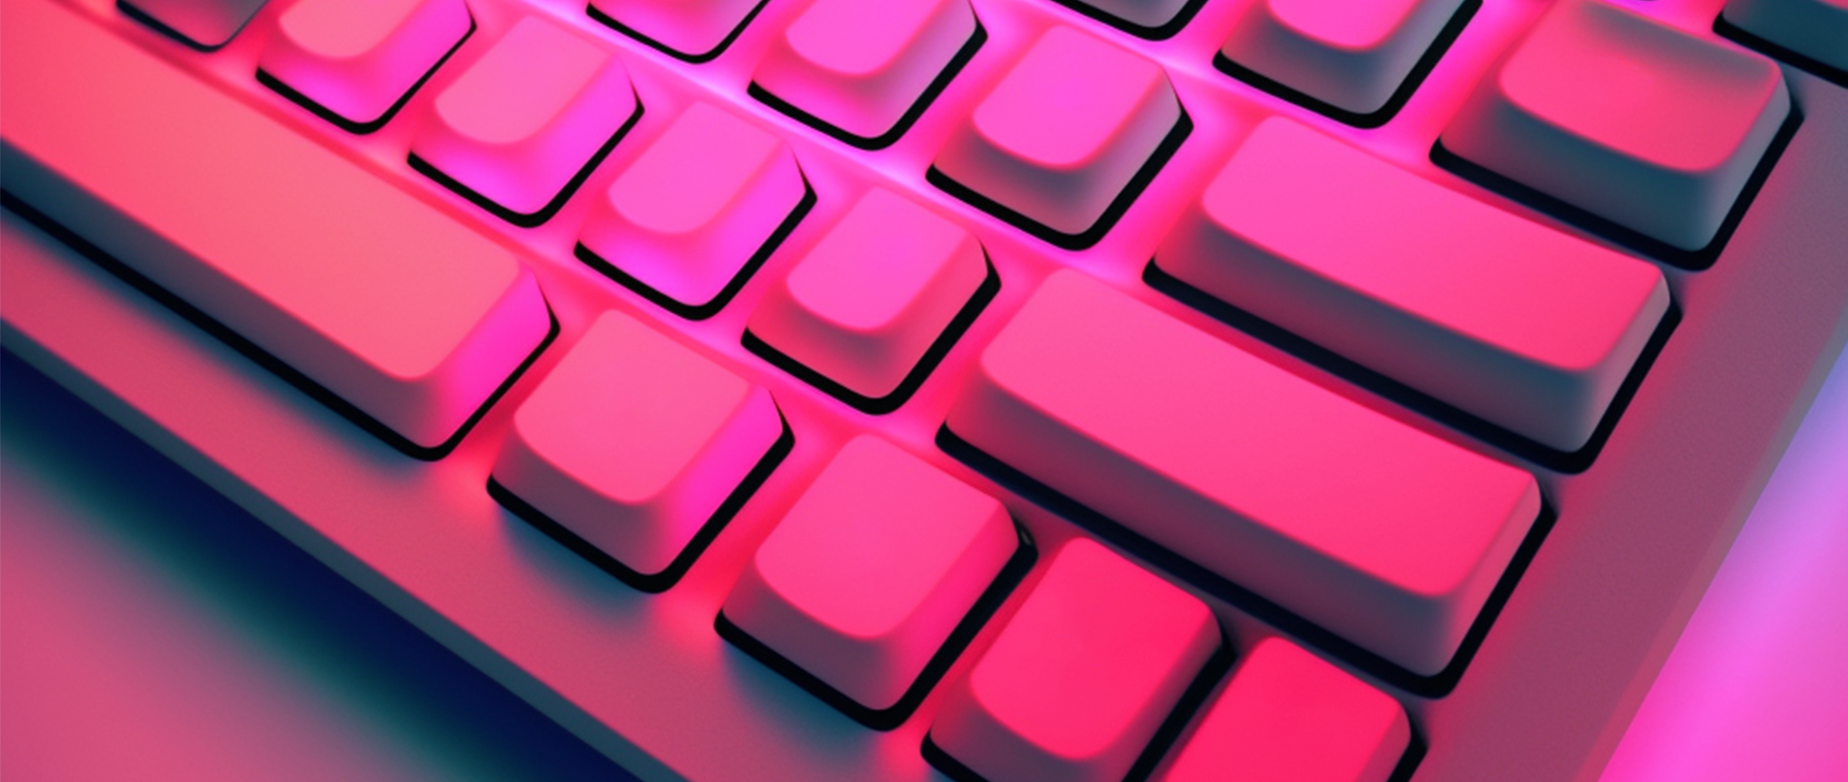 Extreme close-up shot of a keyboard lit by a bright, magenta light.